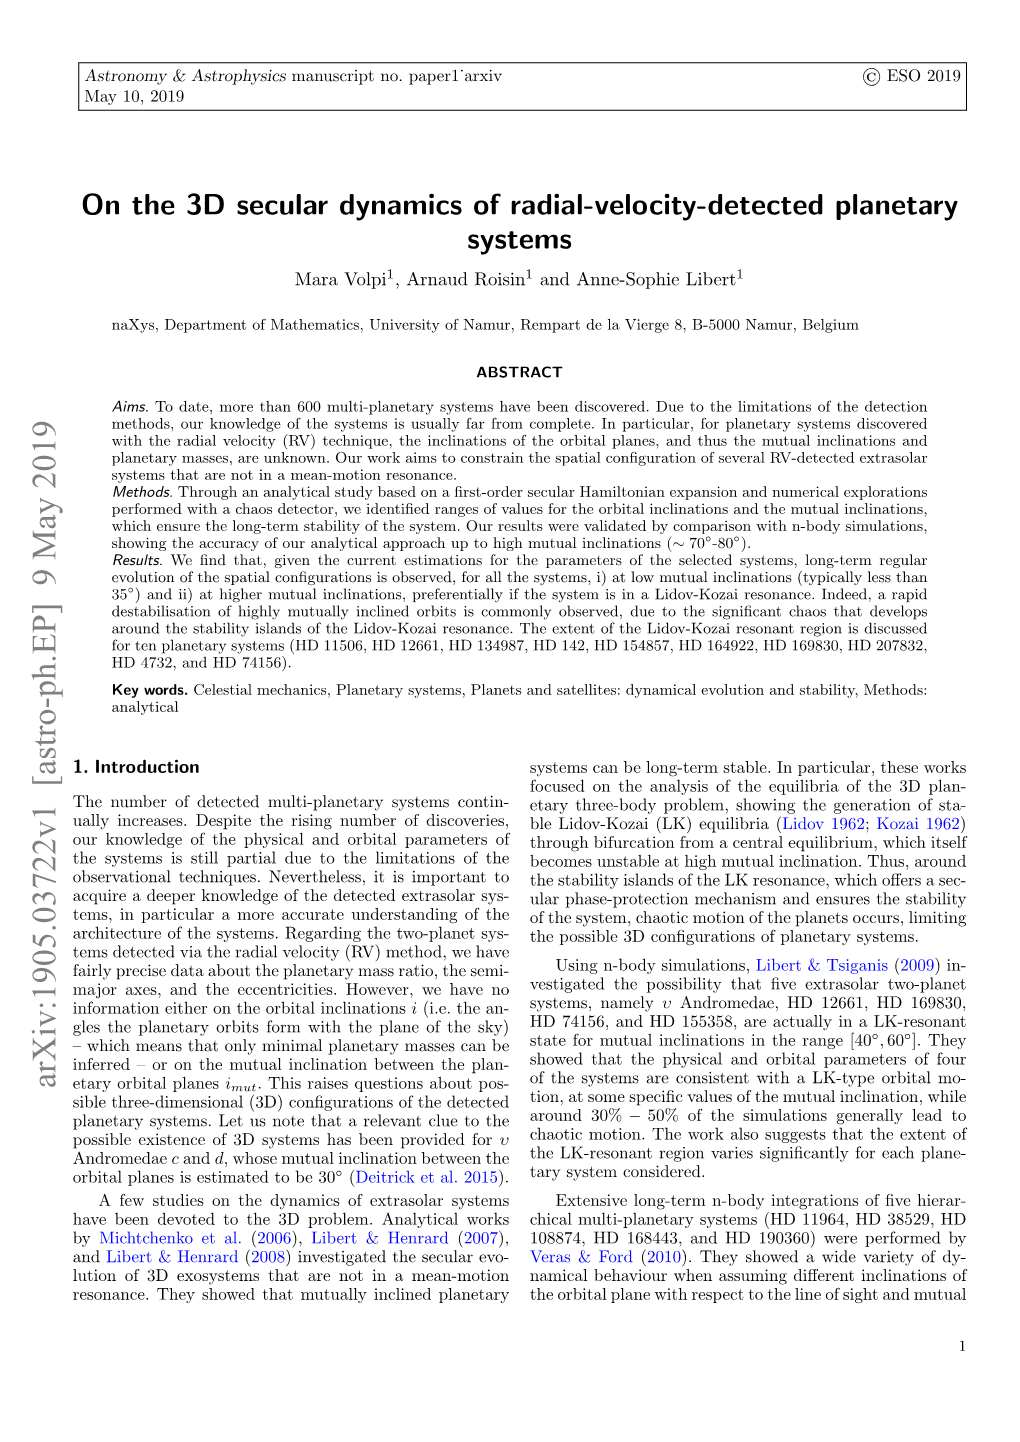 On the 3D Secular Dynamics of Radial-Velocity-Detected Planetary Systems Mara Volpi1, Arnaud Roisin1 and Anne-Sophie Libert1